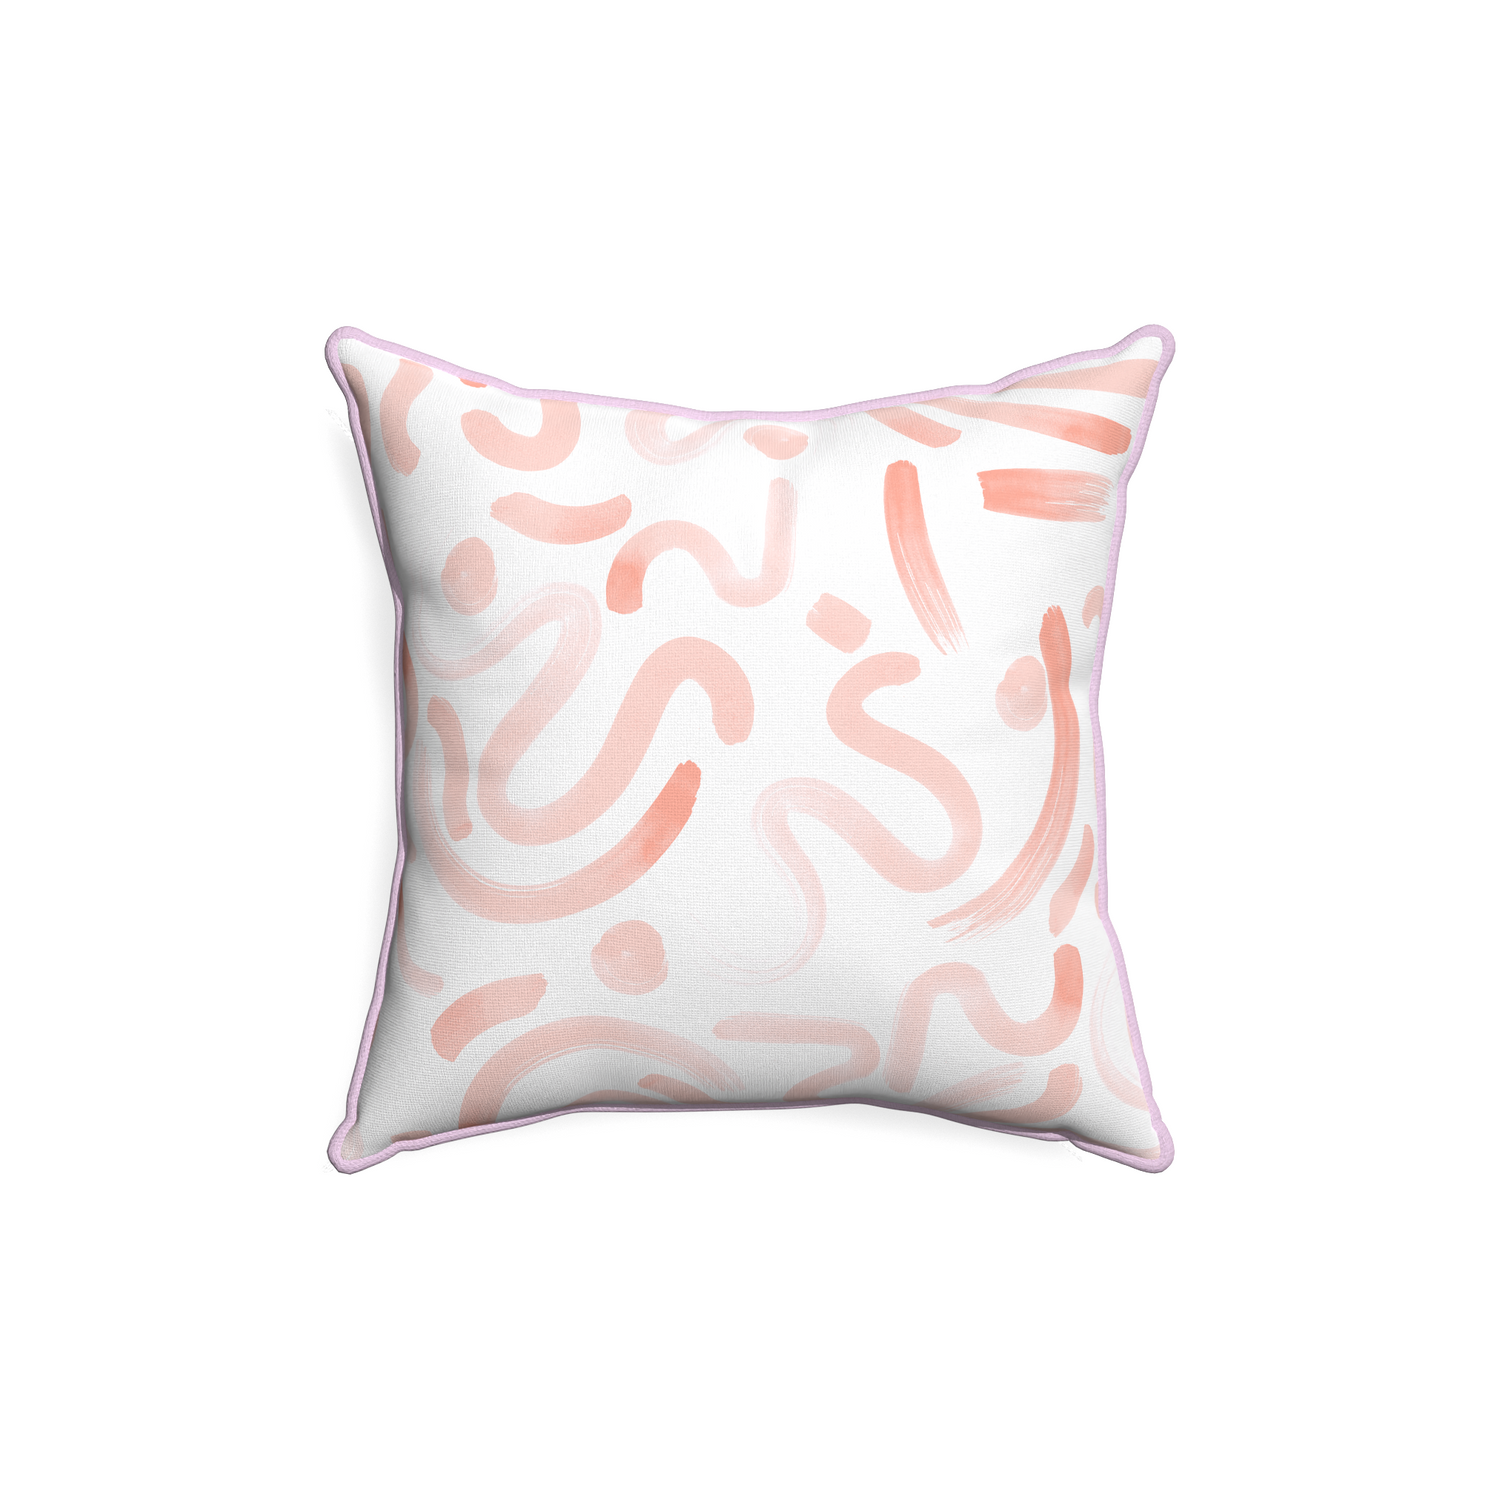 18-square hockney pink custom pink graphicpillow with l piping on white background